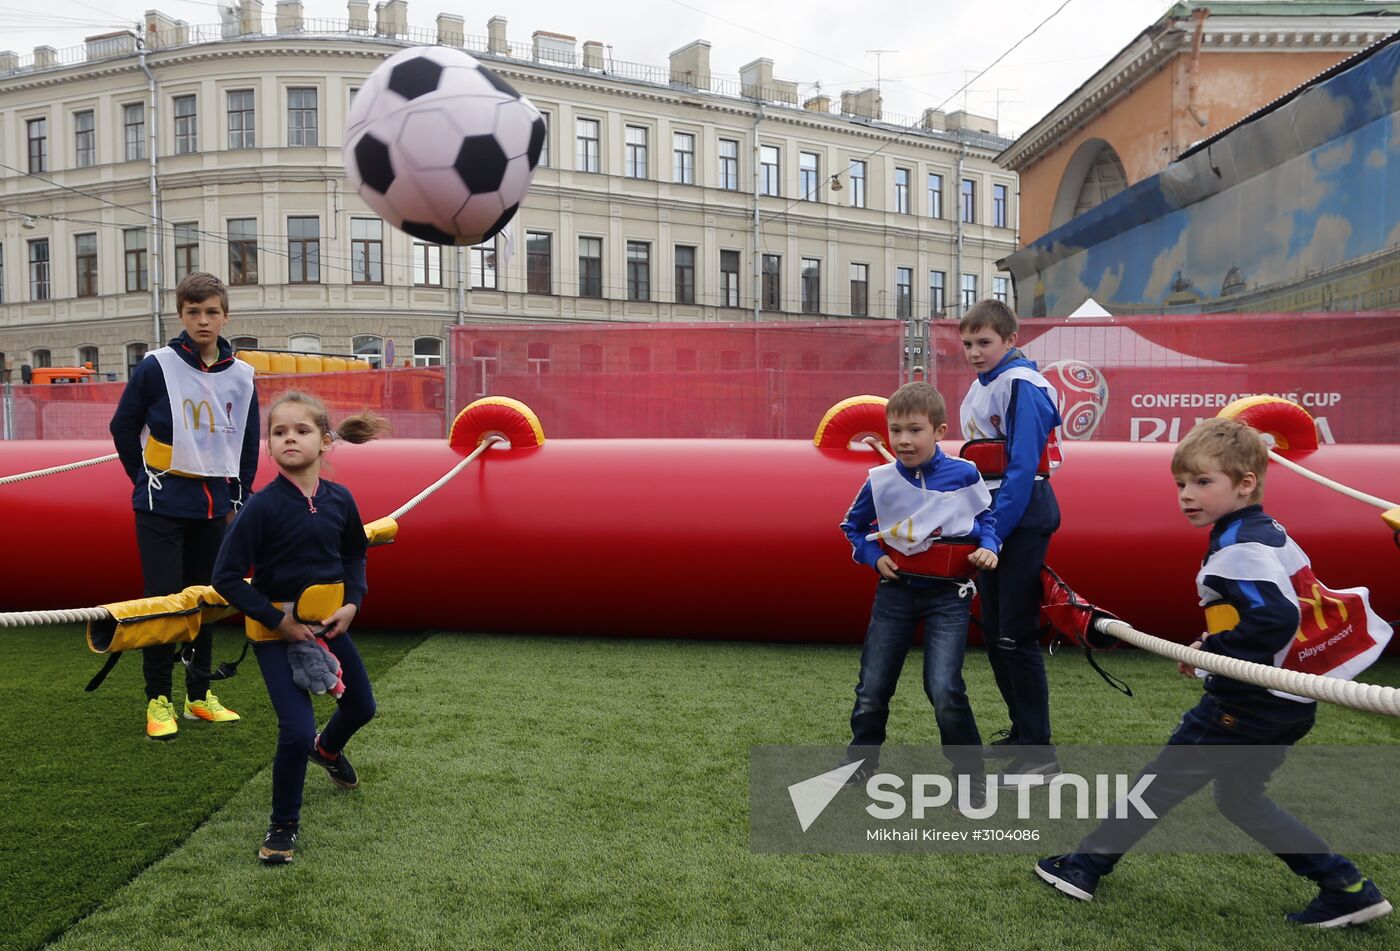 2017 Confederations Cup Park opens in St. Petersburg